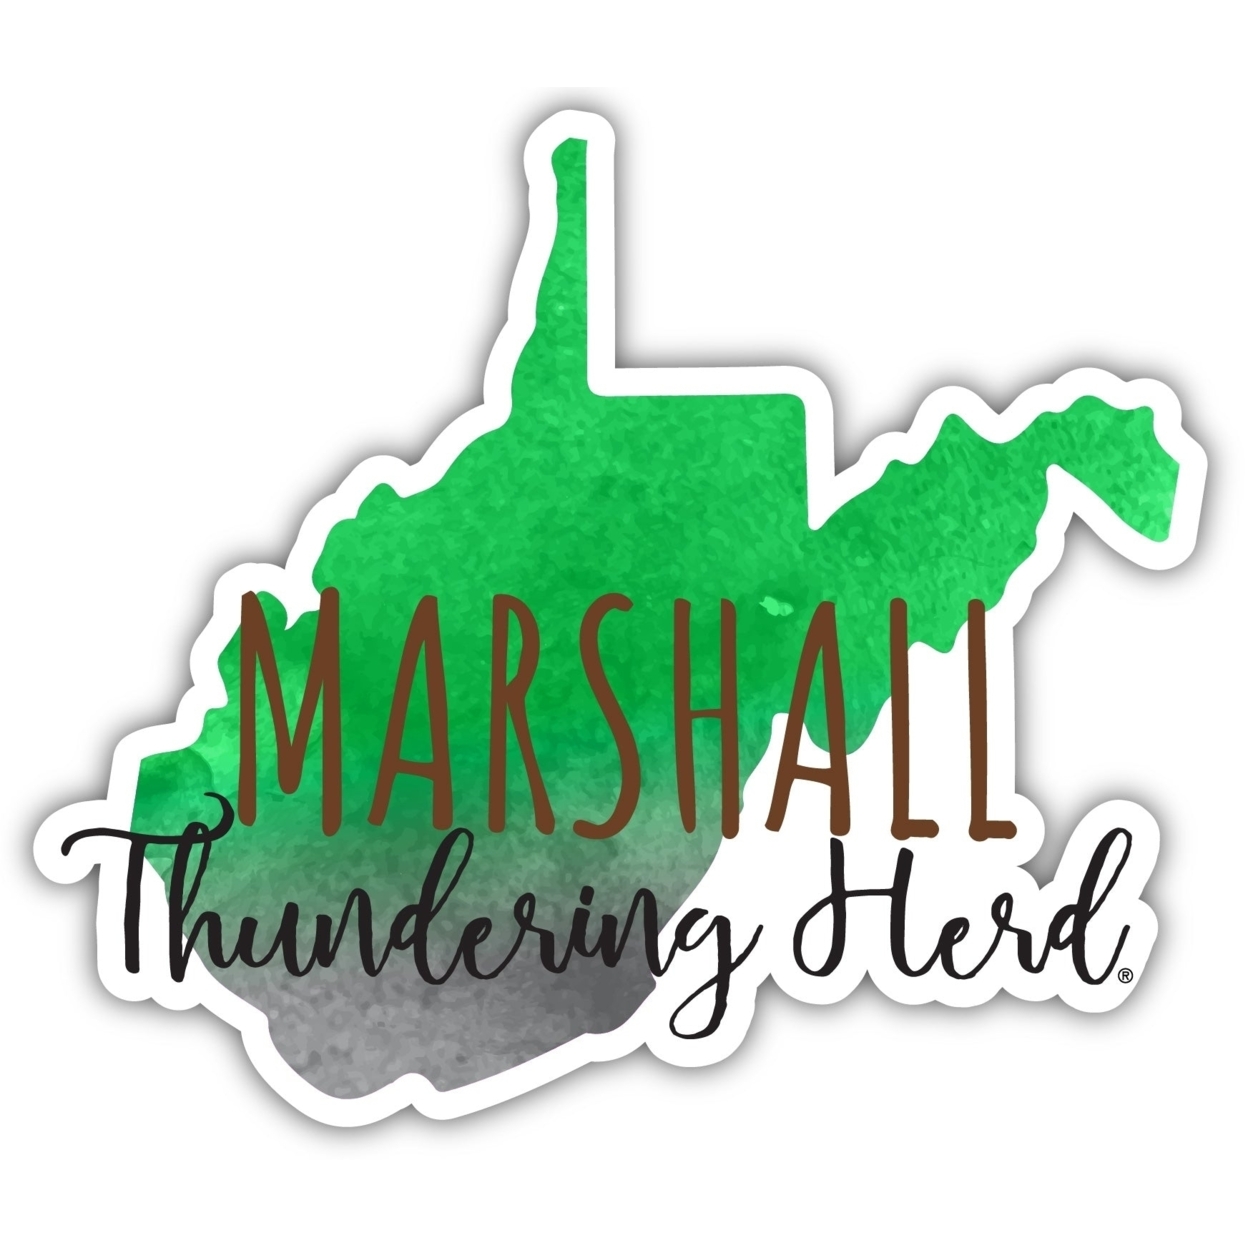 Marshall Thundering Herd Watercolor State Die Cut Decal 2-Inch